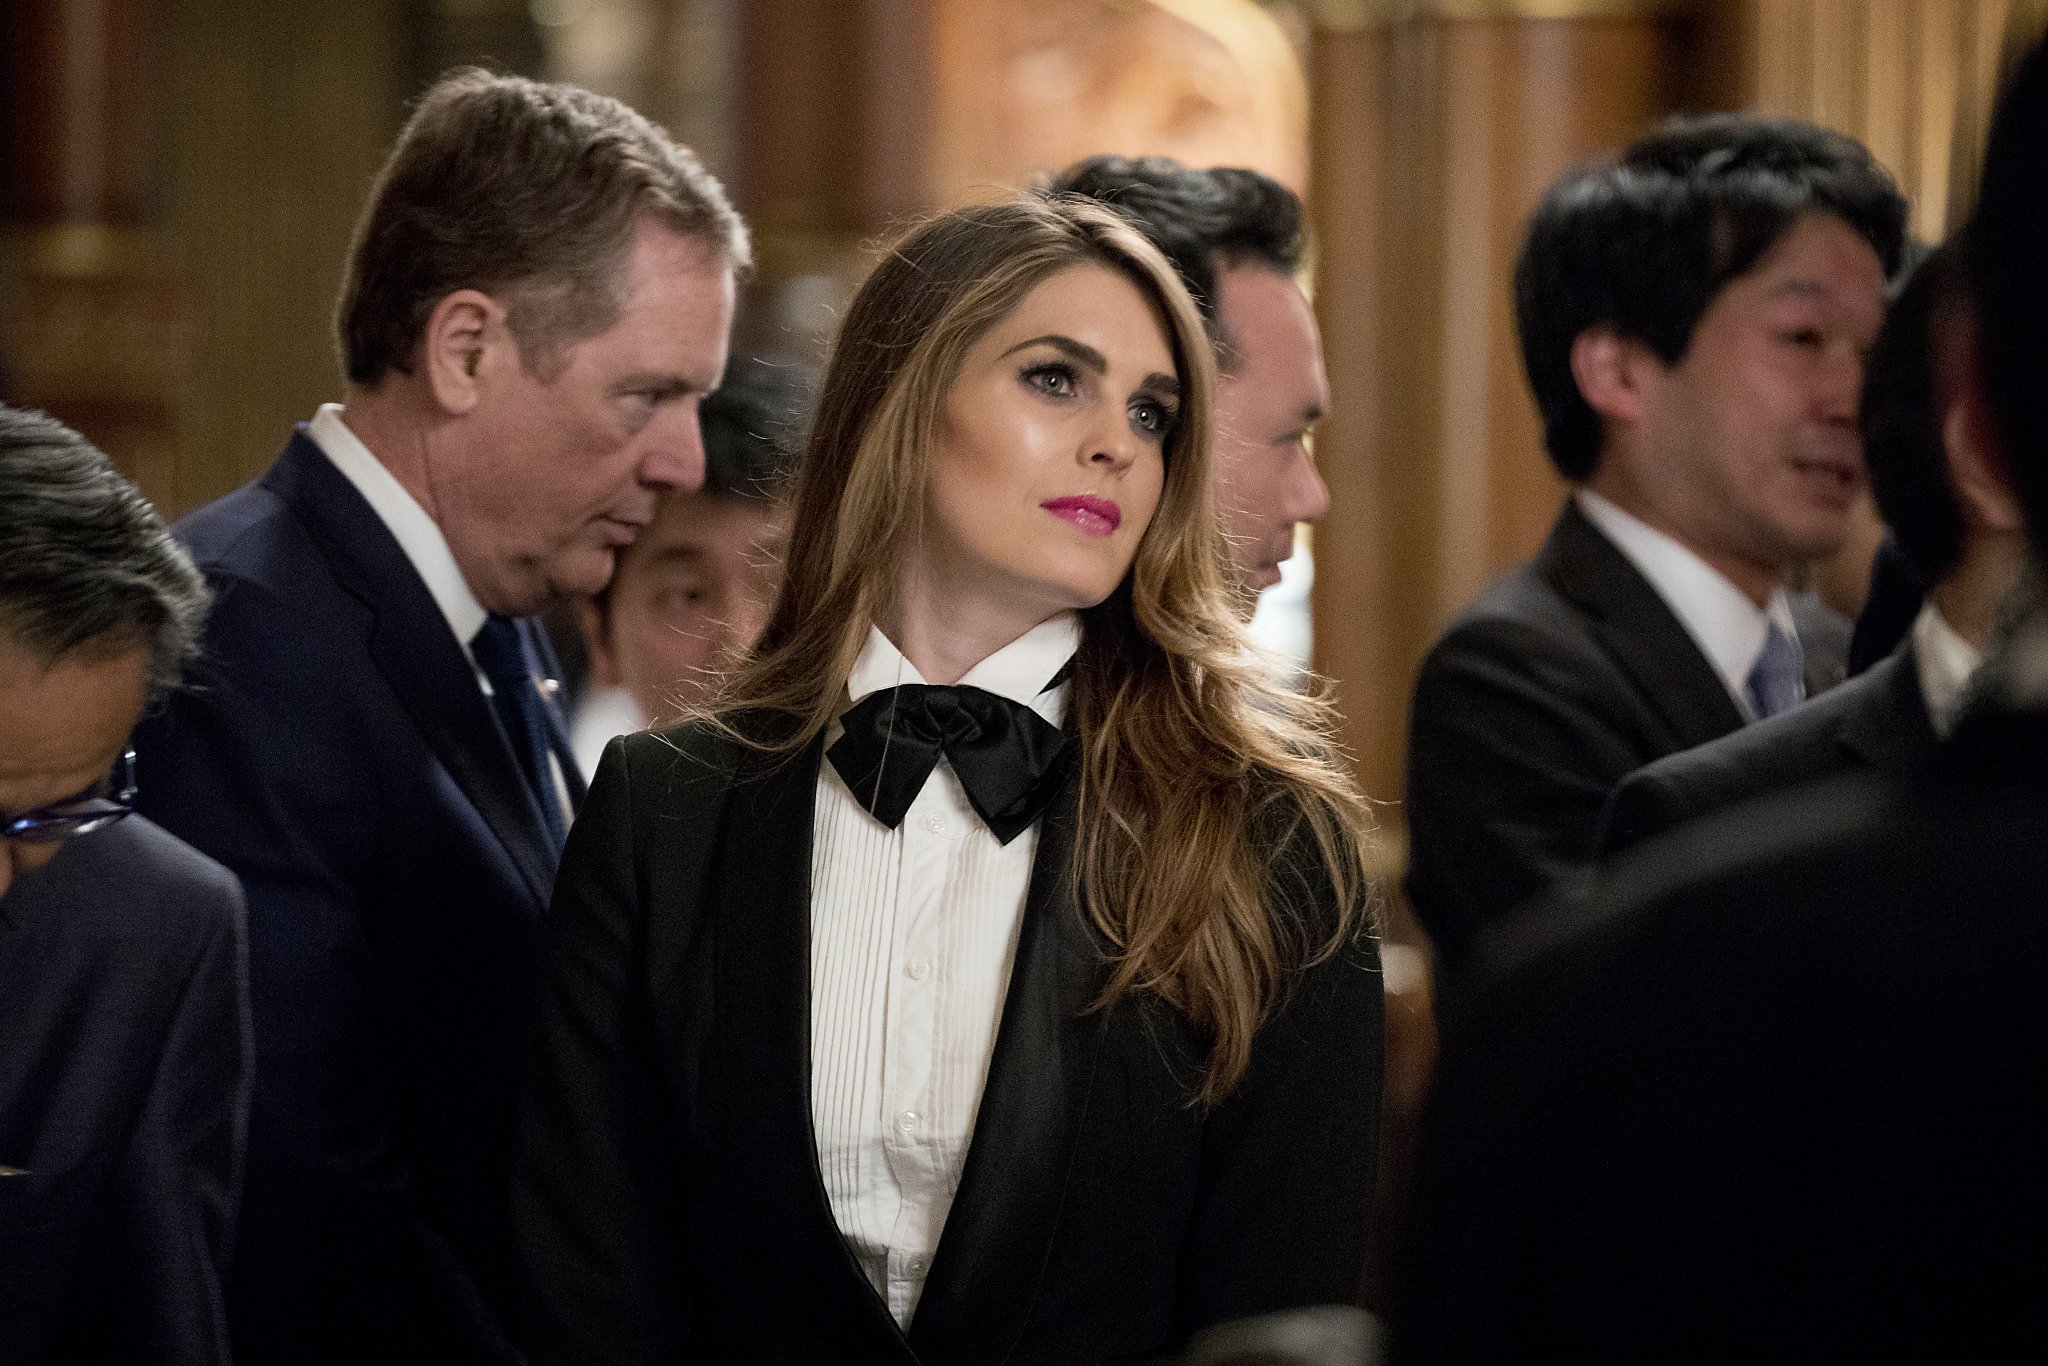 Trump reportedly said Hope Hicks 'had about as much experience as a coffee cup' in ...